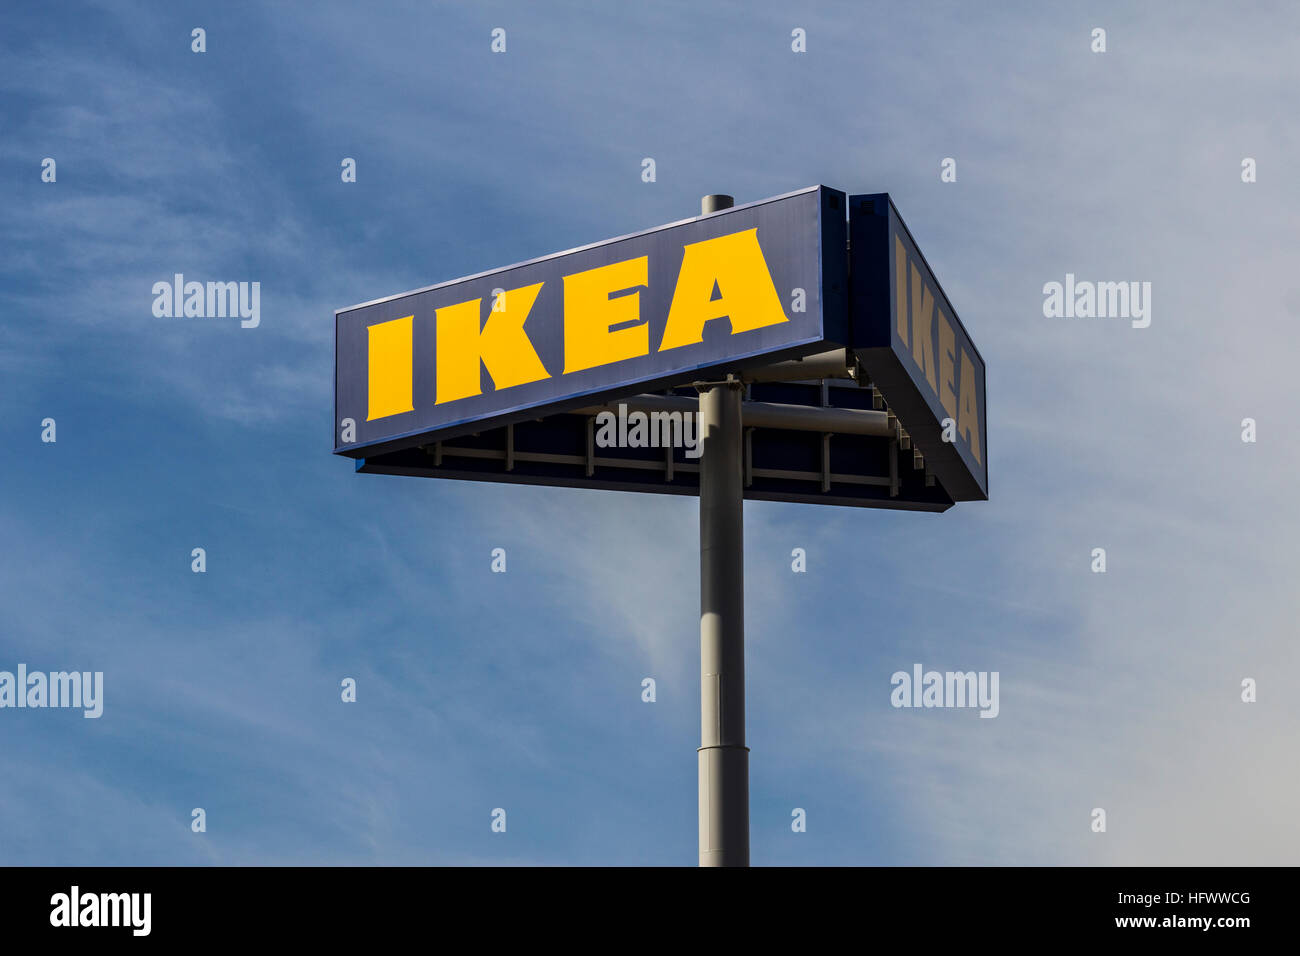 Las Vegas - Circa December 2016: IKEA Home Furnishings Store. Founded in Sweden, IKEA is the world's largest furniture retailer I Stock Photo